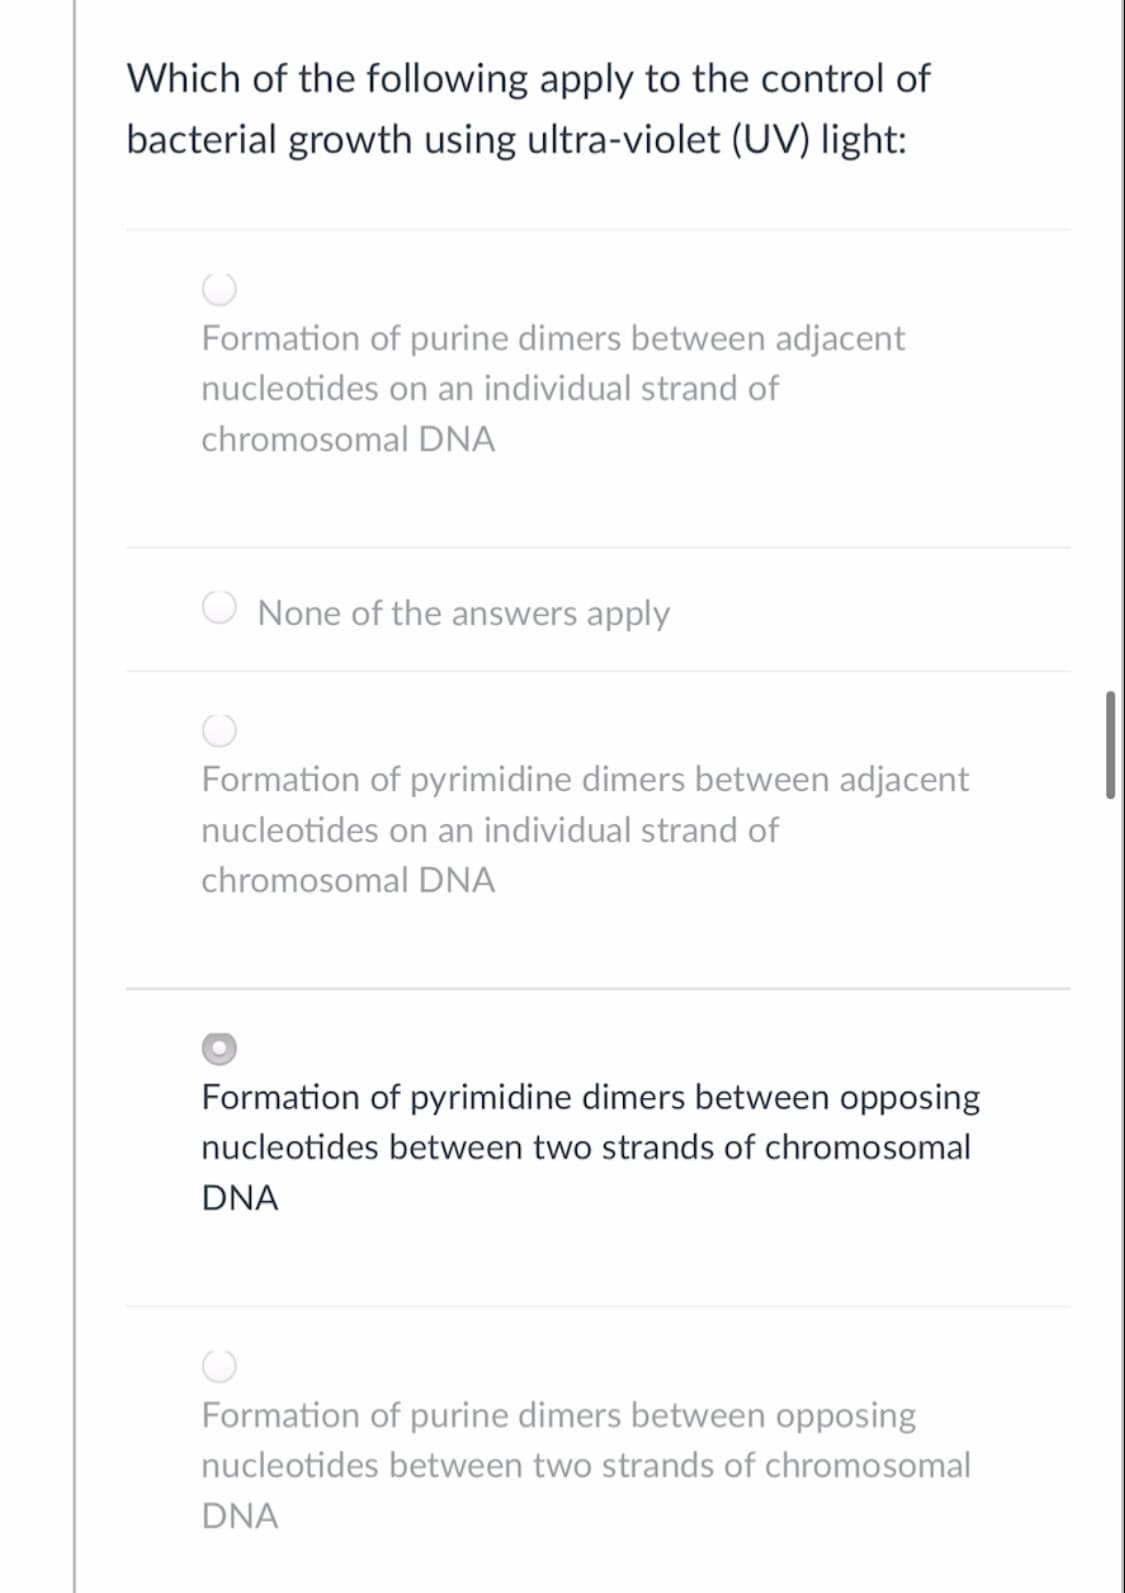 Which of the following apply to the control of
bacterial growth using ultra-violet (UV) light:
Formation of purine dimers between adjacent
nucleotides on an individual strand of
chromosomal DNA
None of the answers apply
Formation of pyrimidine dimers between adjacent
nucleotides on an individual strand of
chromosomal DNA
Formation of pyrimidine dimers between opposing
nucleotides between two strands of chromosomal
DNA
Formation of purine dimers between opposing
nucleotides between two strands of chromosomal
DNA
